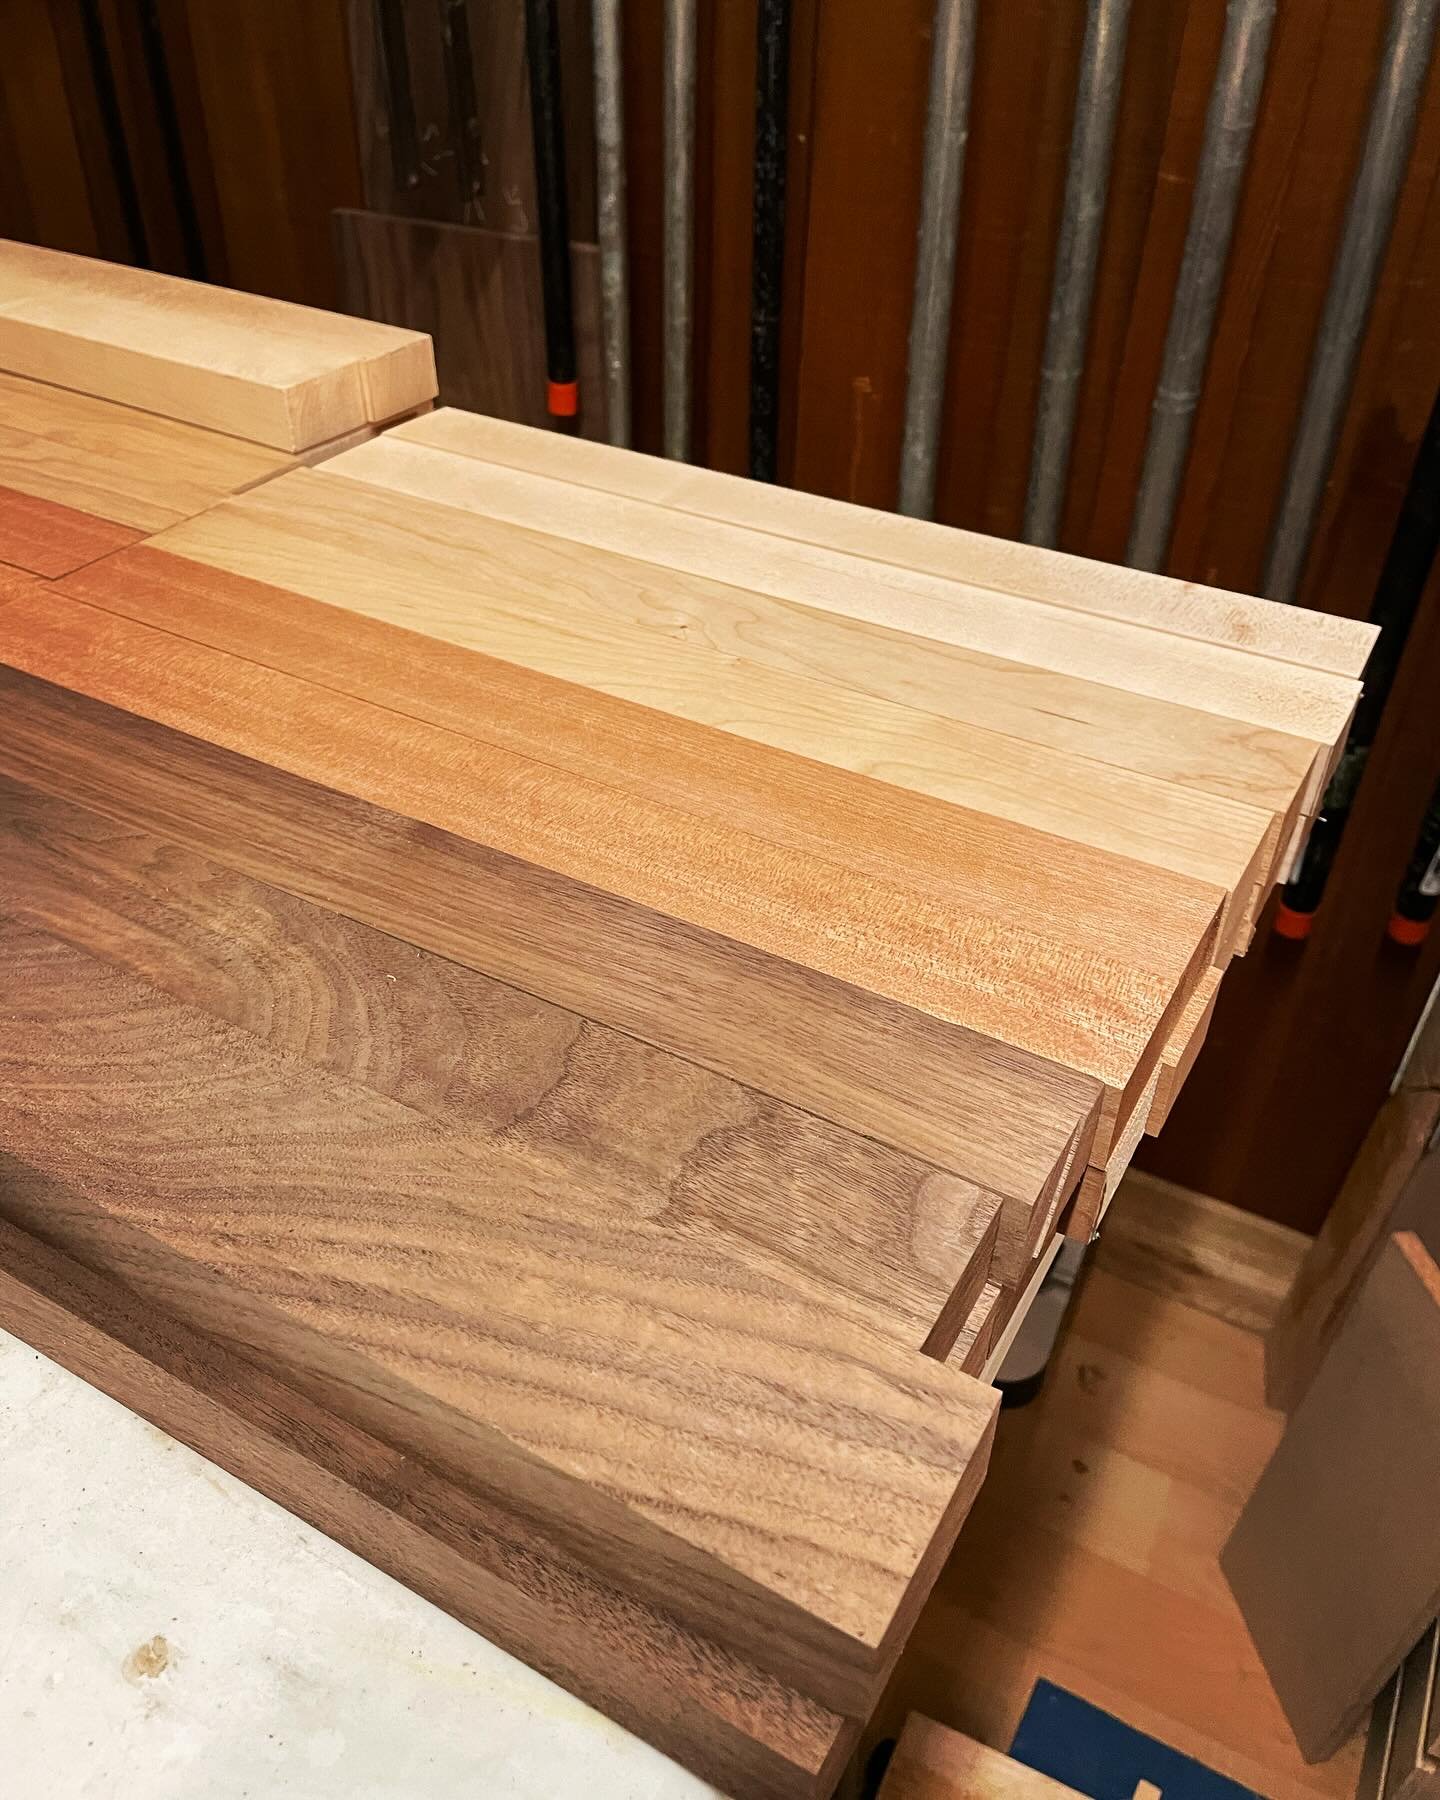 Freshly milled and ready for the first glue up. Doubling up on shop projects to get this one done for a fundraising auction next month. Excited to play with color gradient for this cutting board.  #cuttingboard #woodworker #woodworking #endgrain #cus